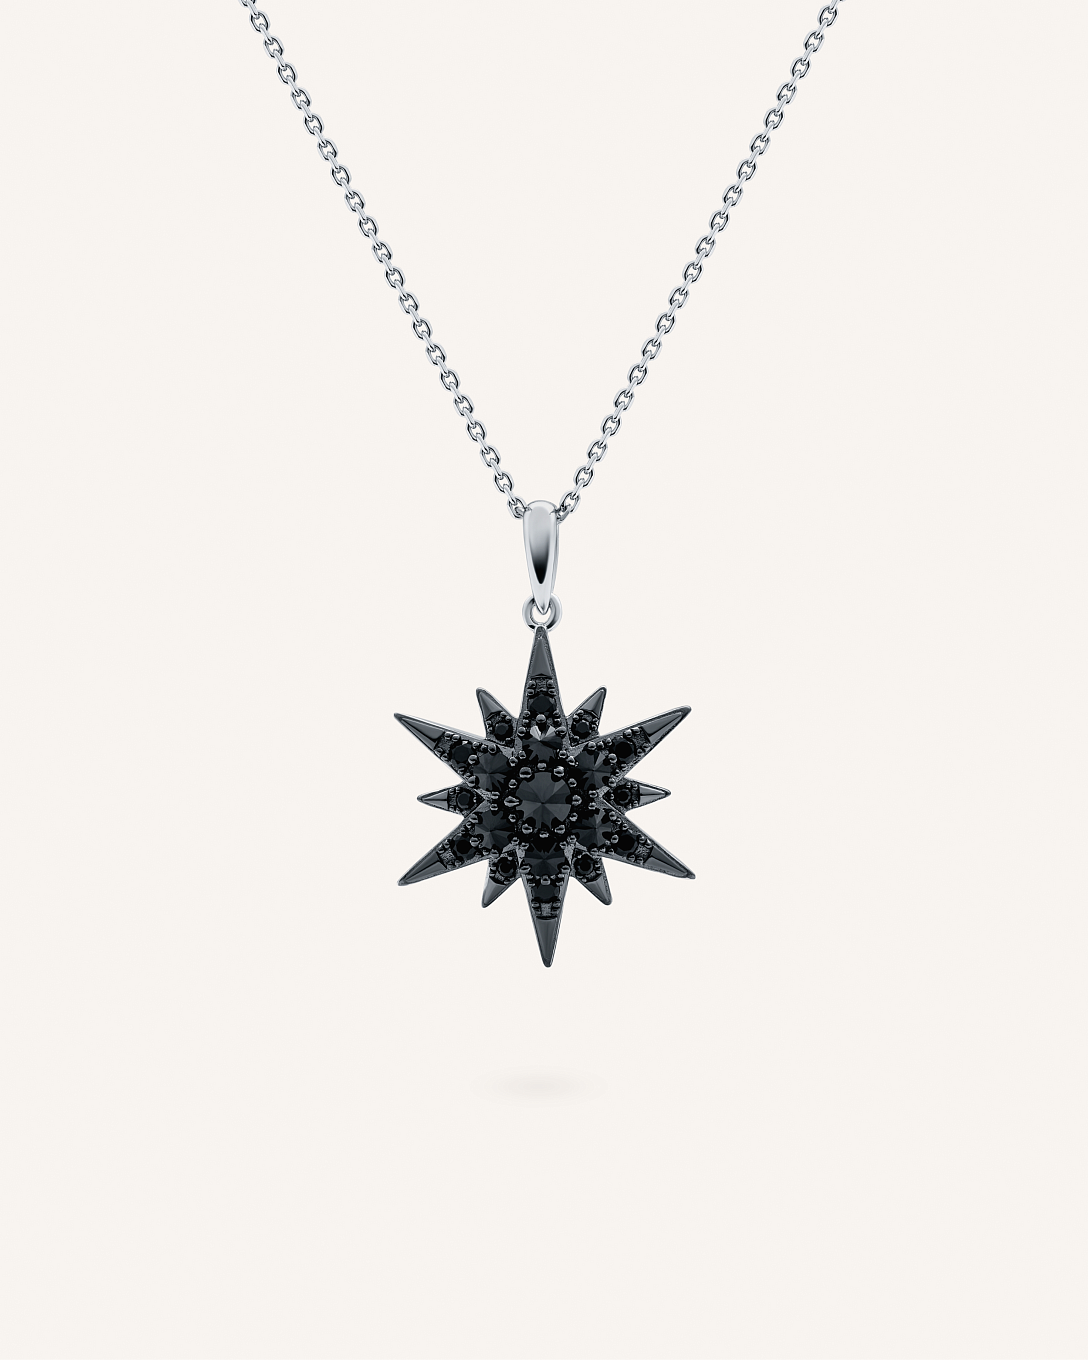 Silver pendant with Spinel